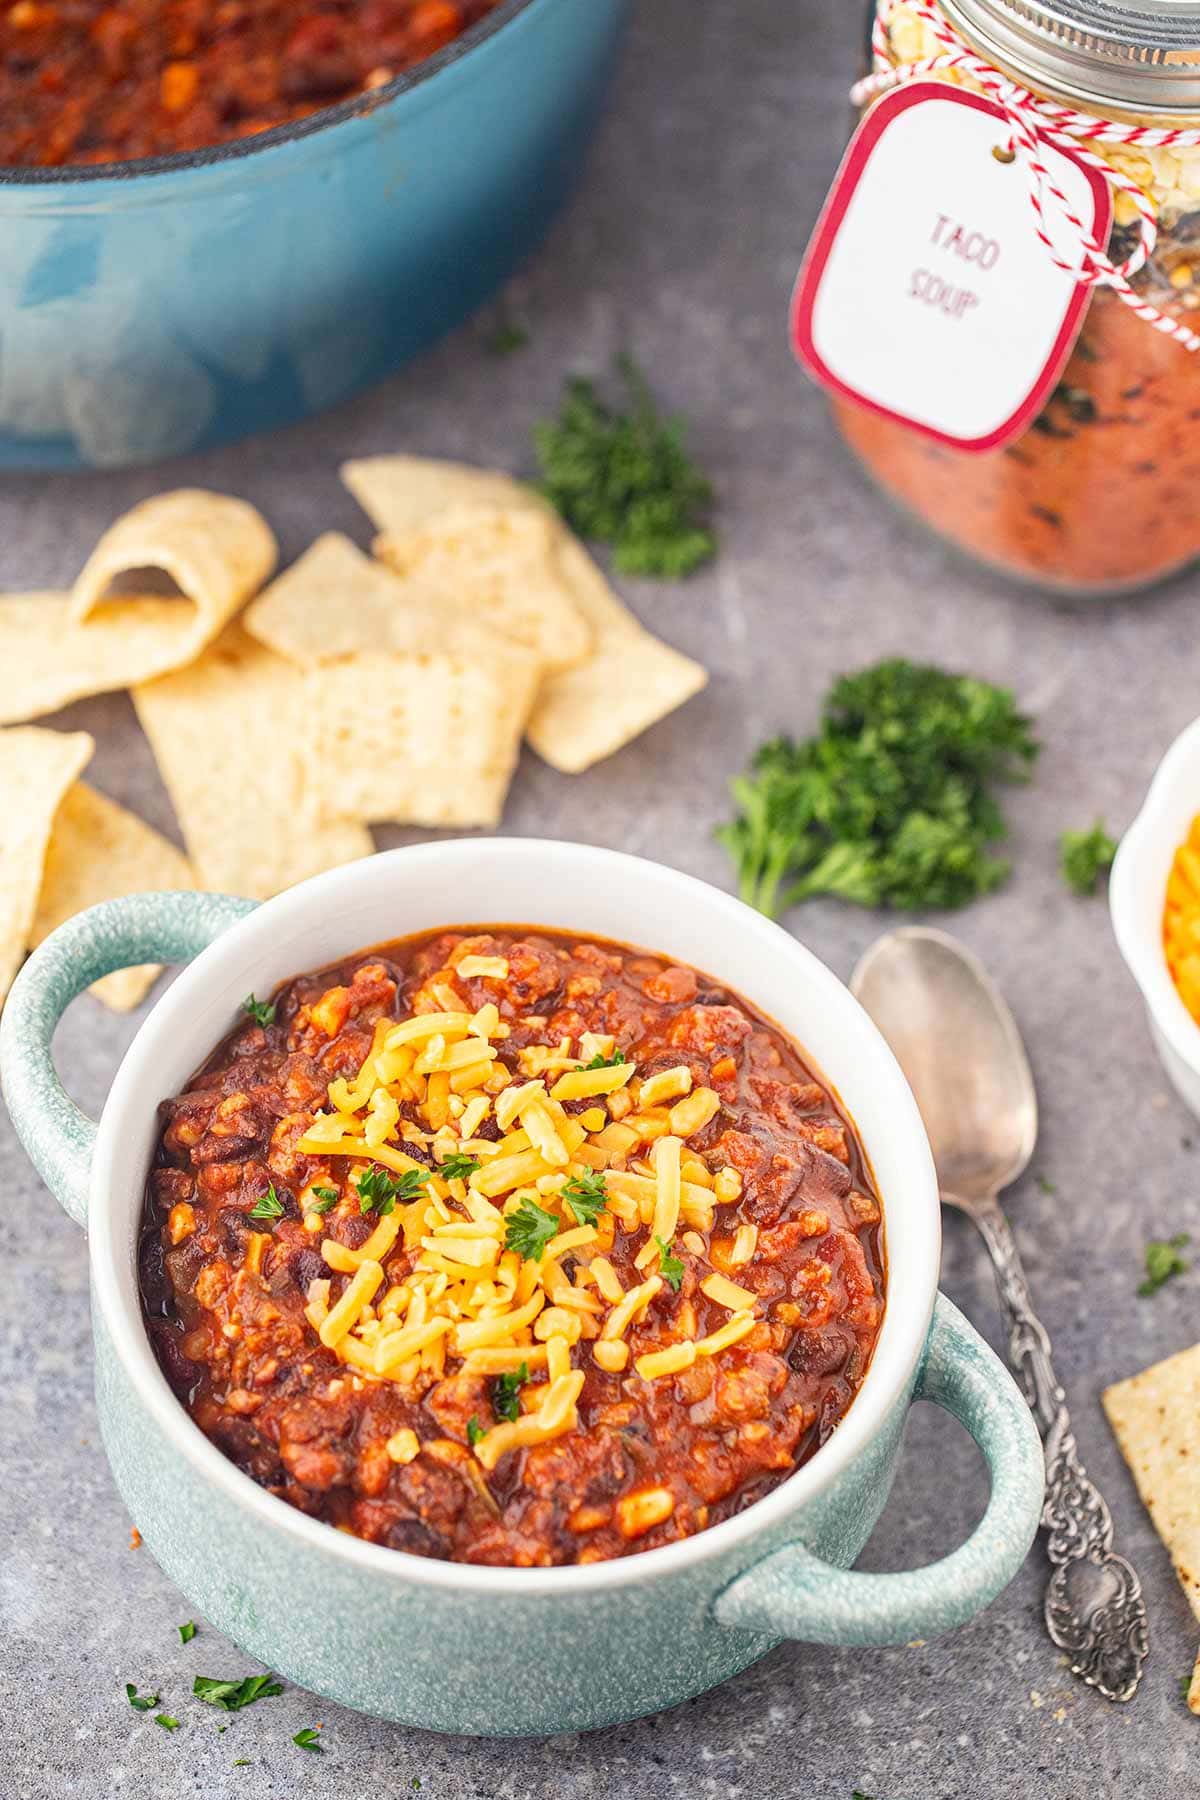 Table scene showing bowl of Taco Soup in a Jar made into soup, surrounded by ingredients, pot of soup, and meal in a jar.